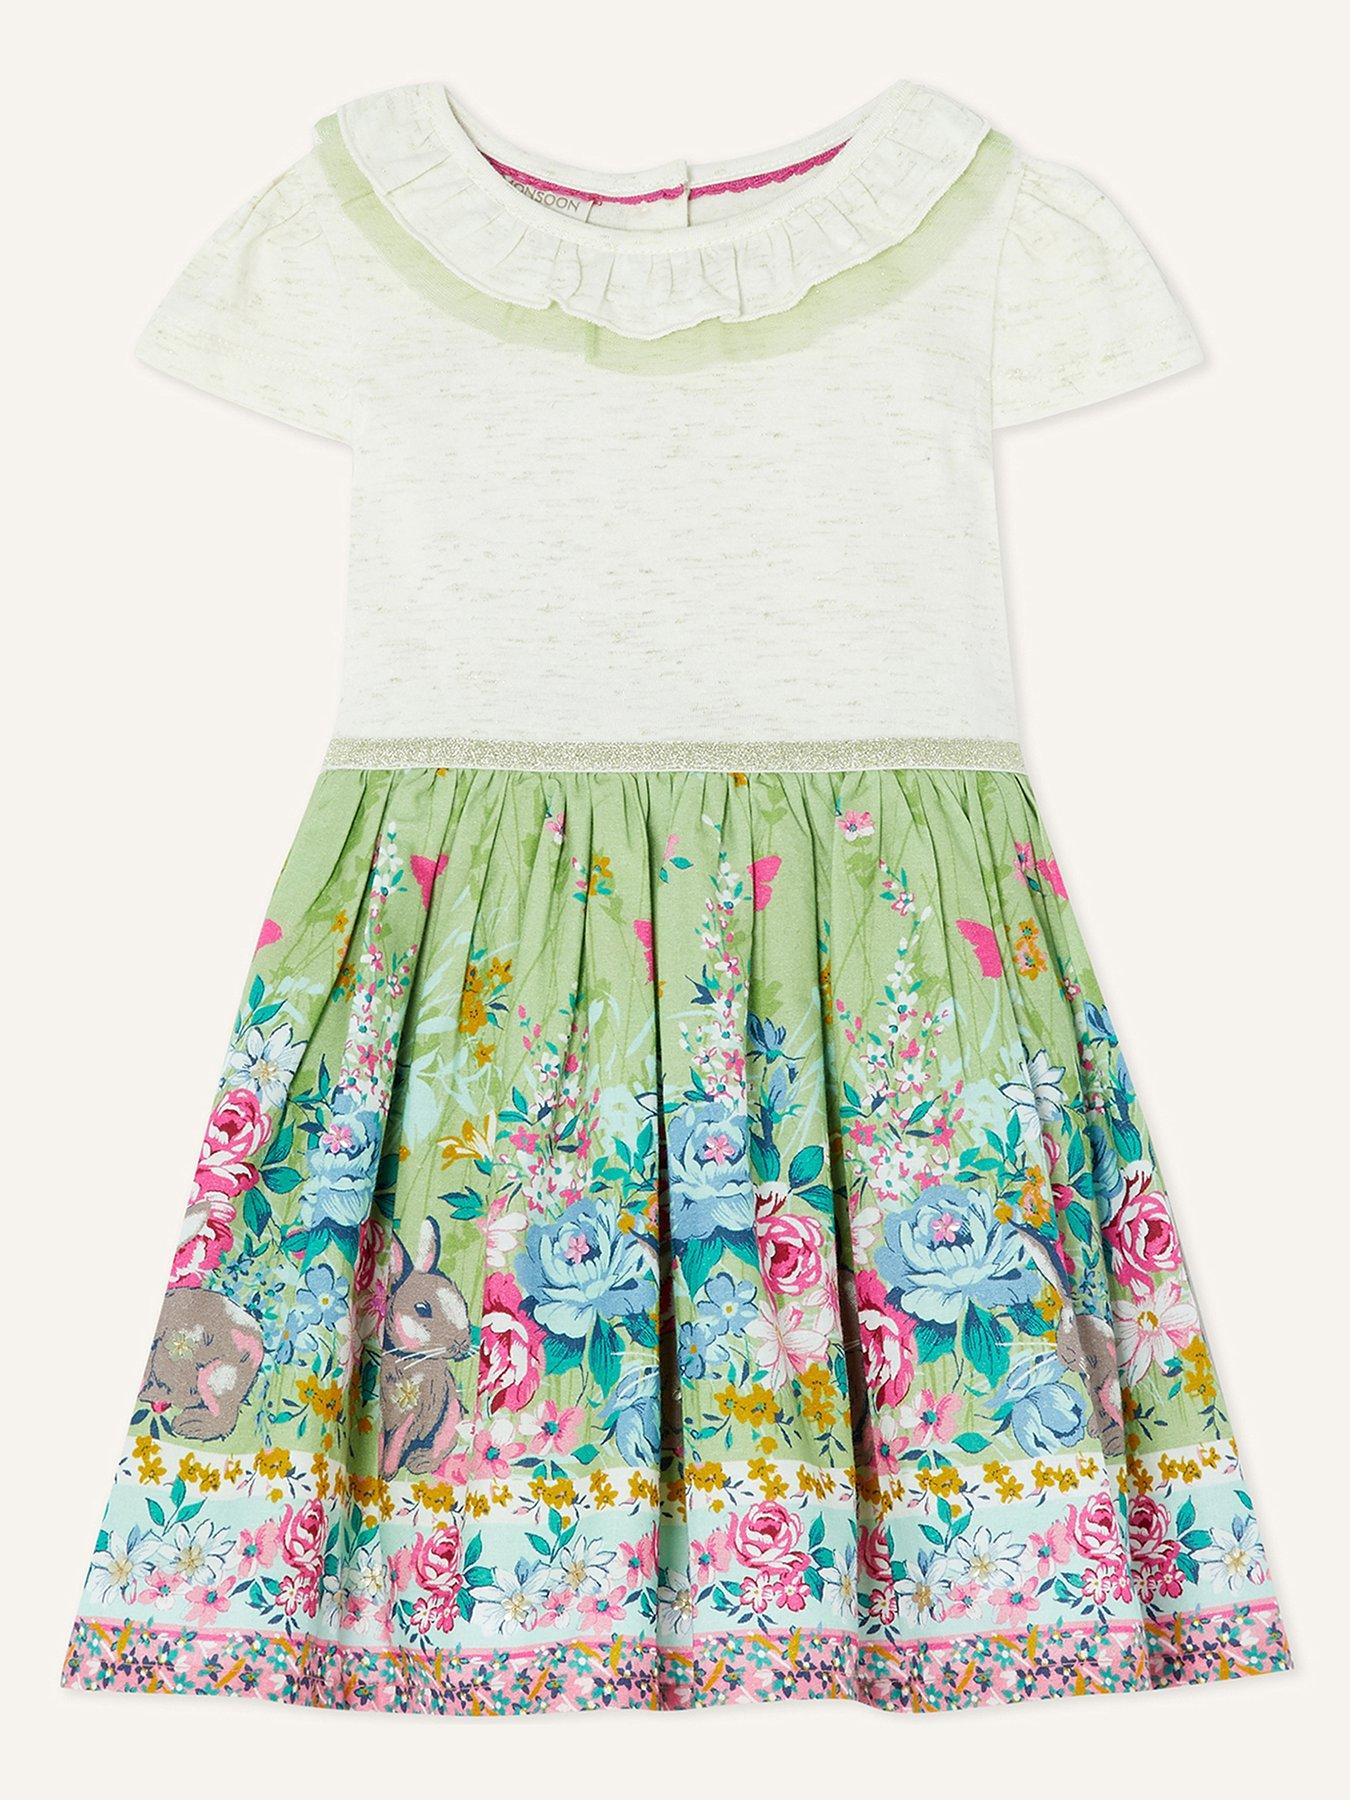 Kids Baby Girls S.e.w. Bunny & Floral Print 2 In 1 Dress - Green